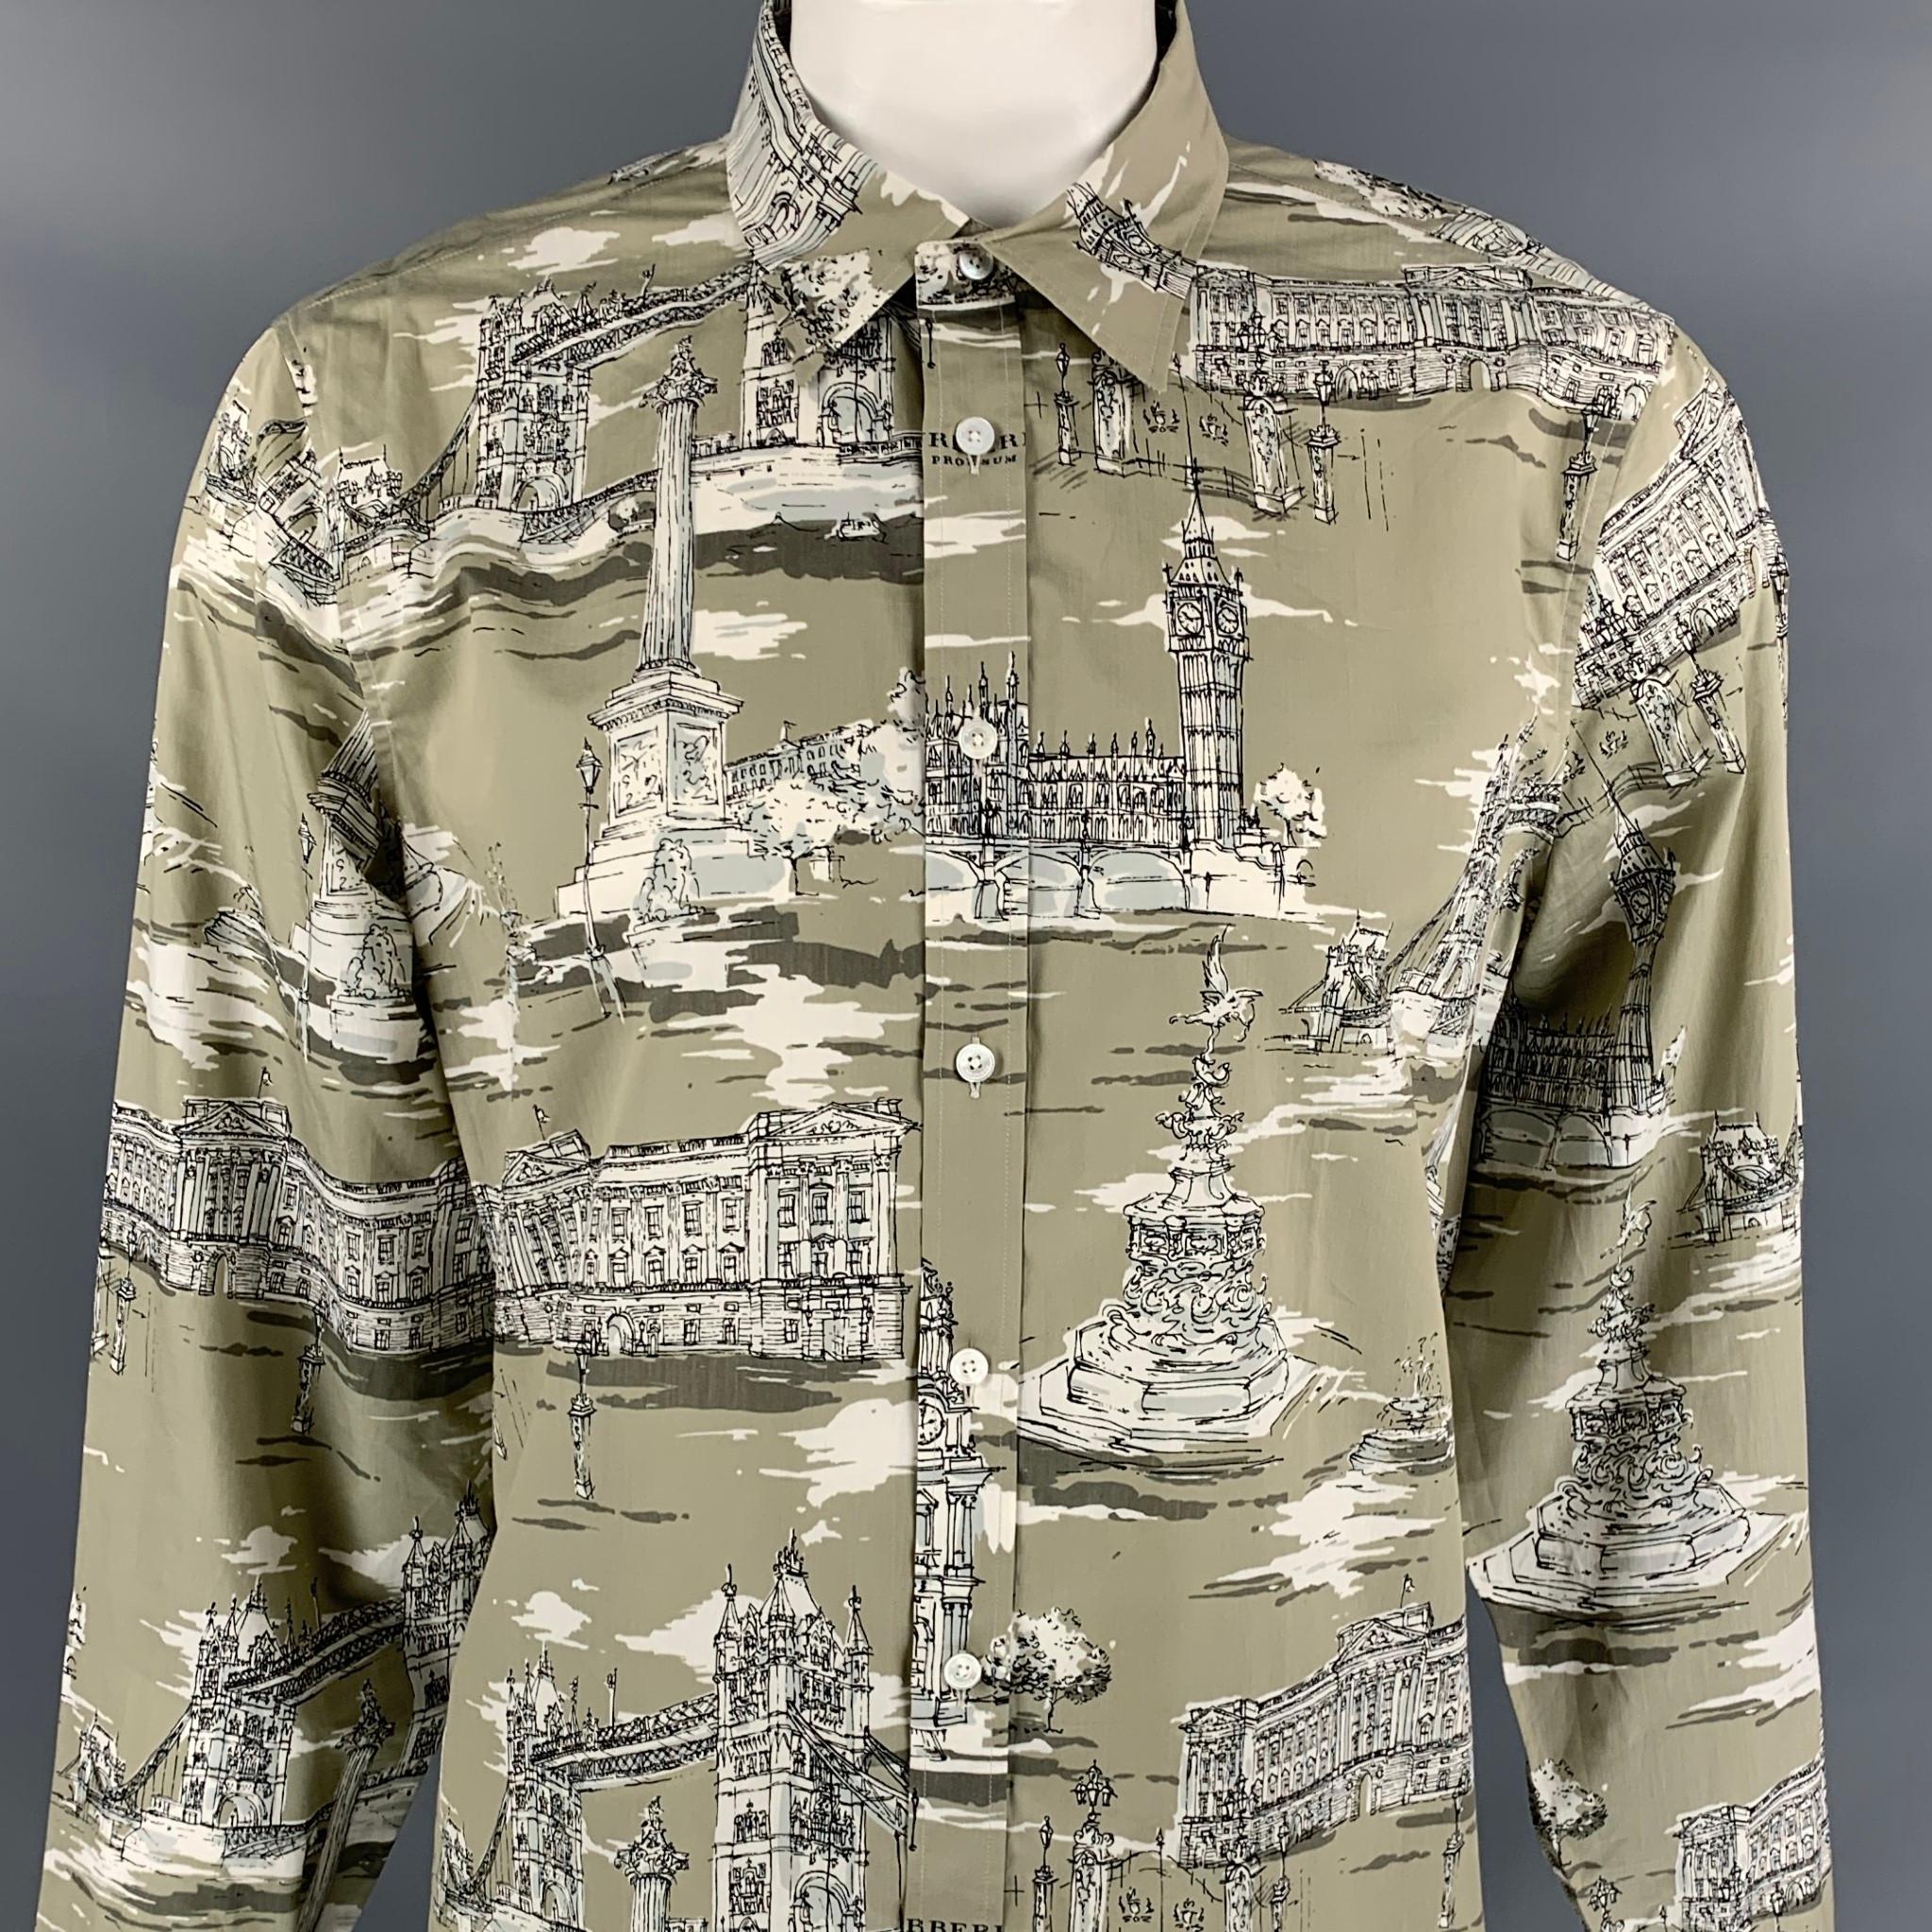 BURBERRY PRORSUM Fall 2014 long sleeve shirt comes in a taupe & beige london landmark print cotton featuring a pointed collar and a button up closure. Made in Italy.

Very Good Pre-Owned Condition.
Marked: 17.5/44

Measurements:

Shoulder: 19.5